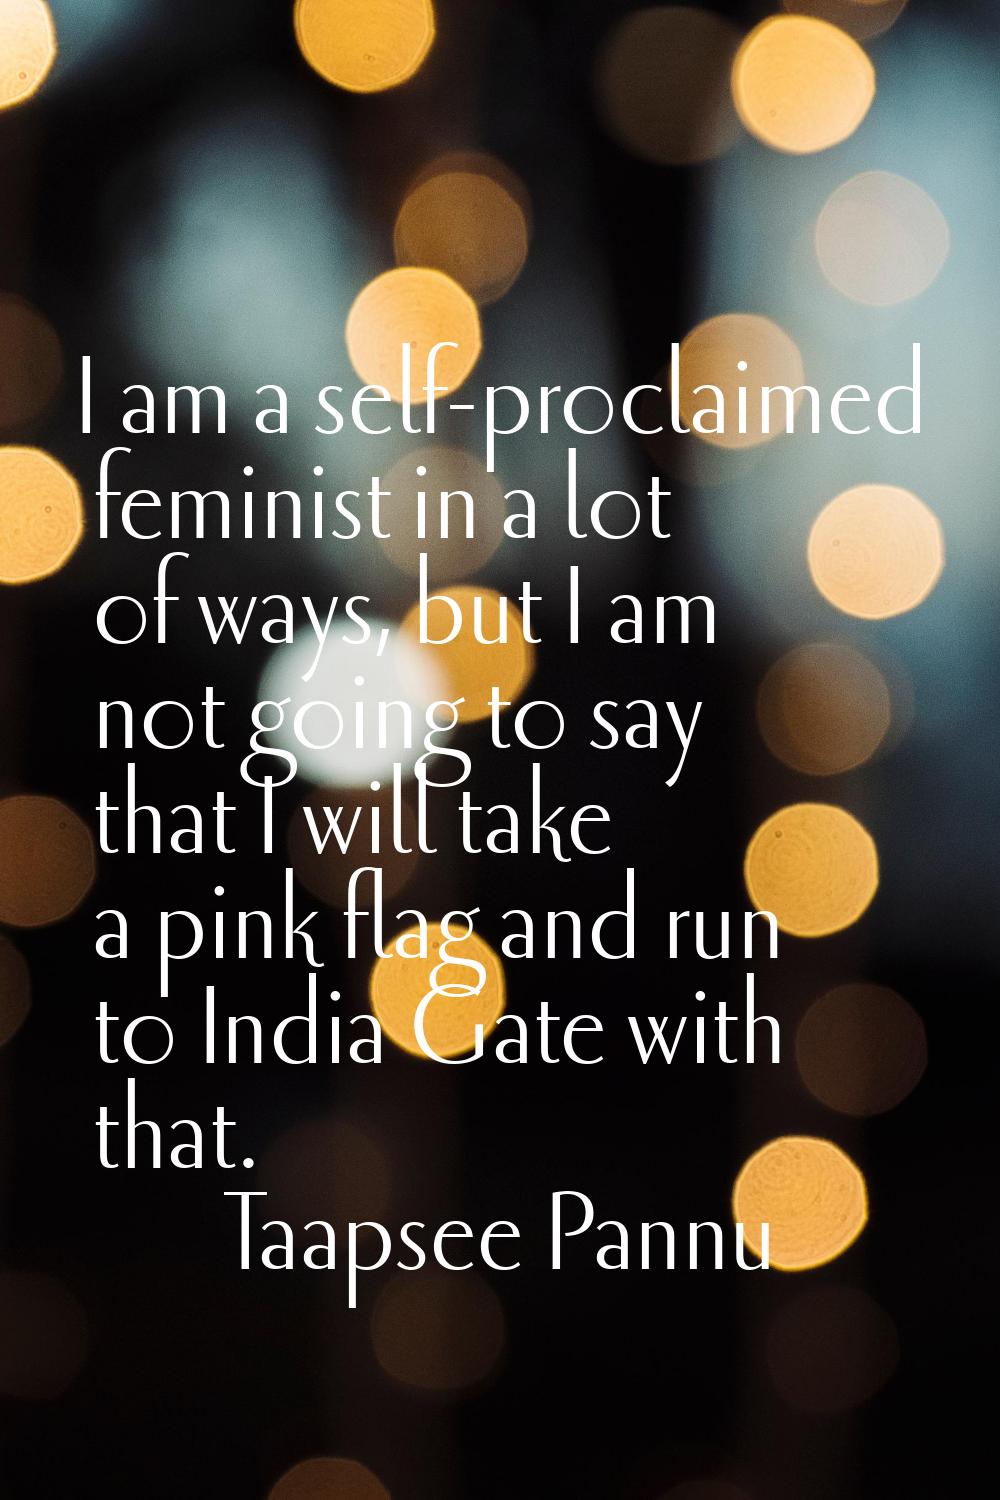 I am a self-proclaimed feminist in a lot of ways, but I am not going to say that I will take a pink